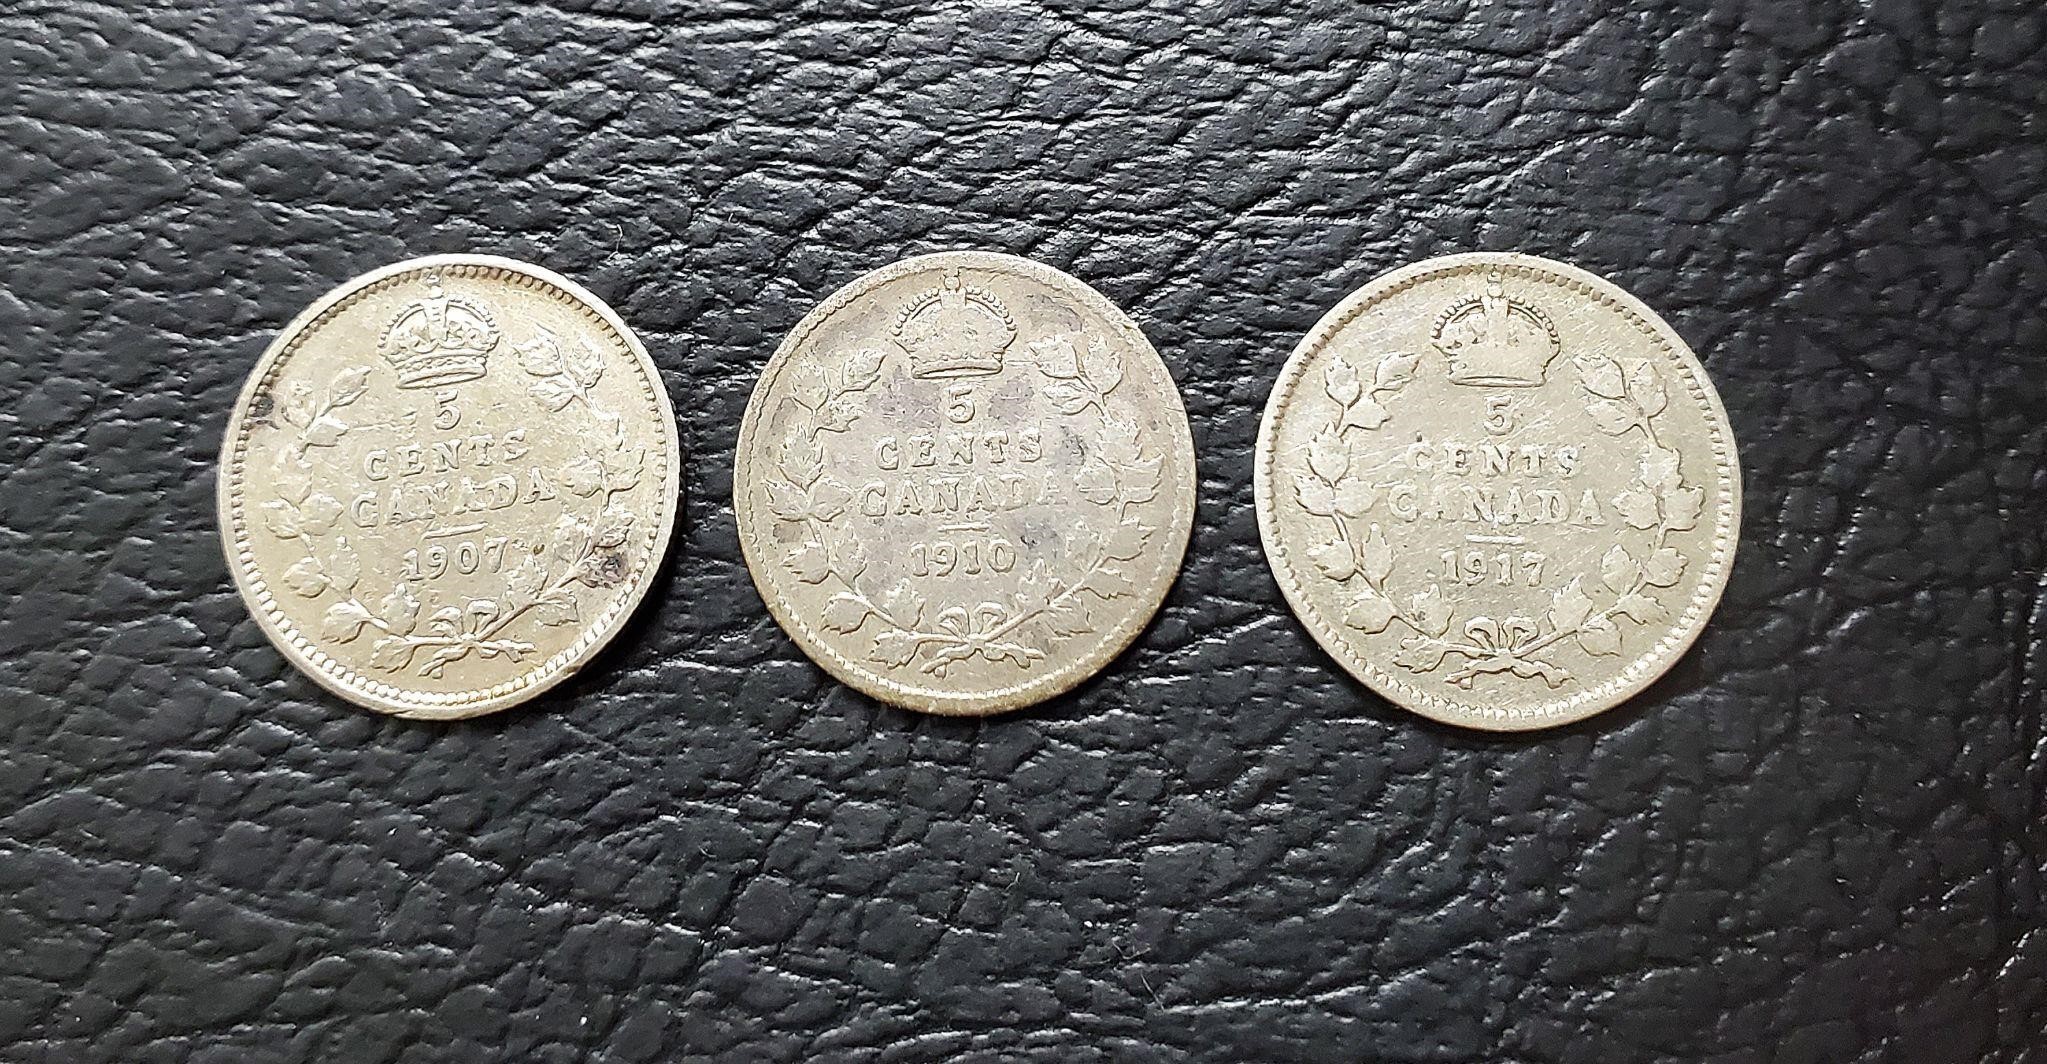 Silver 5 Cent Canada Coins